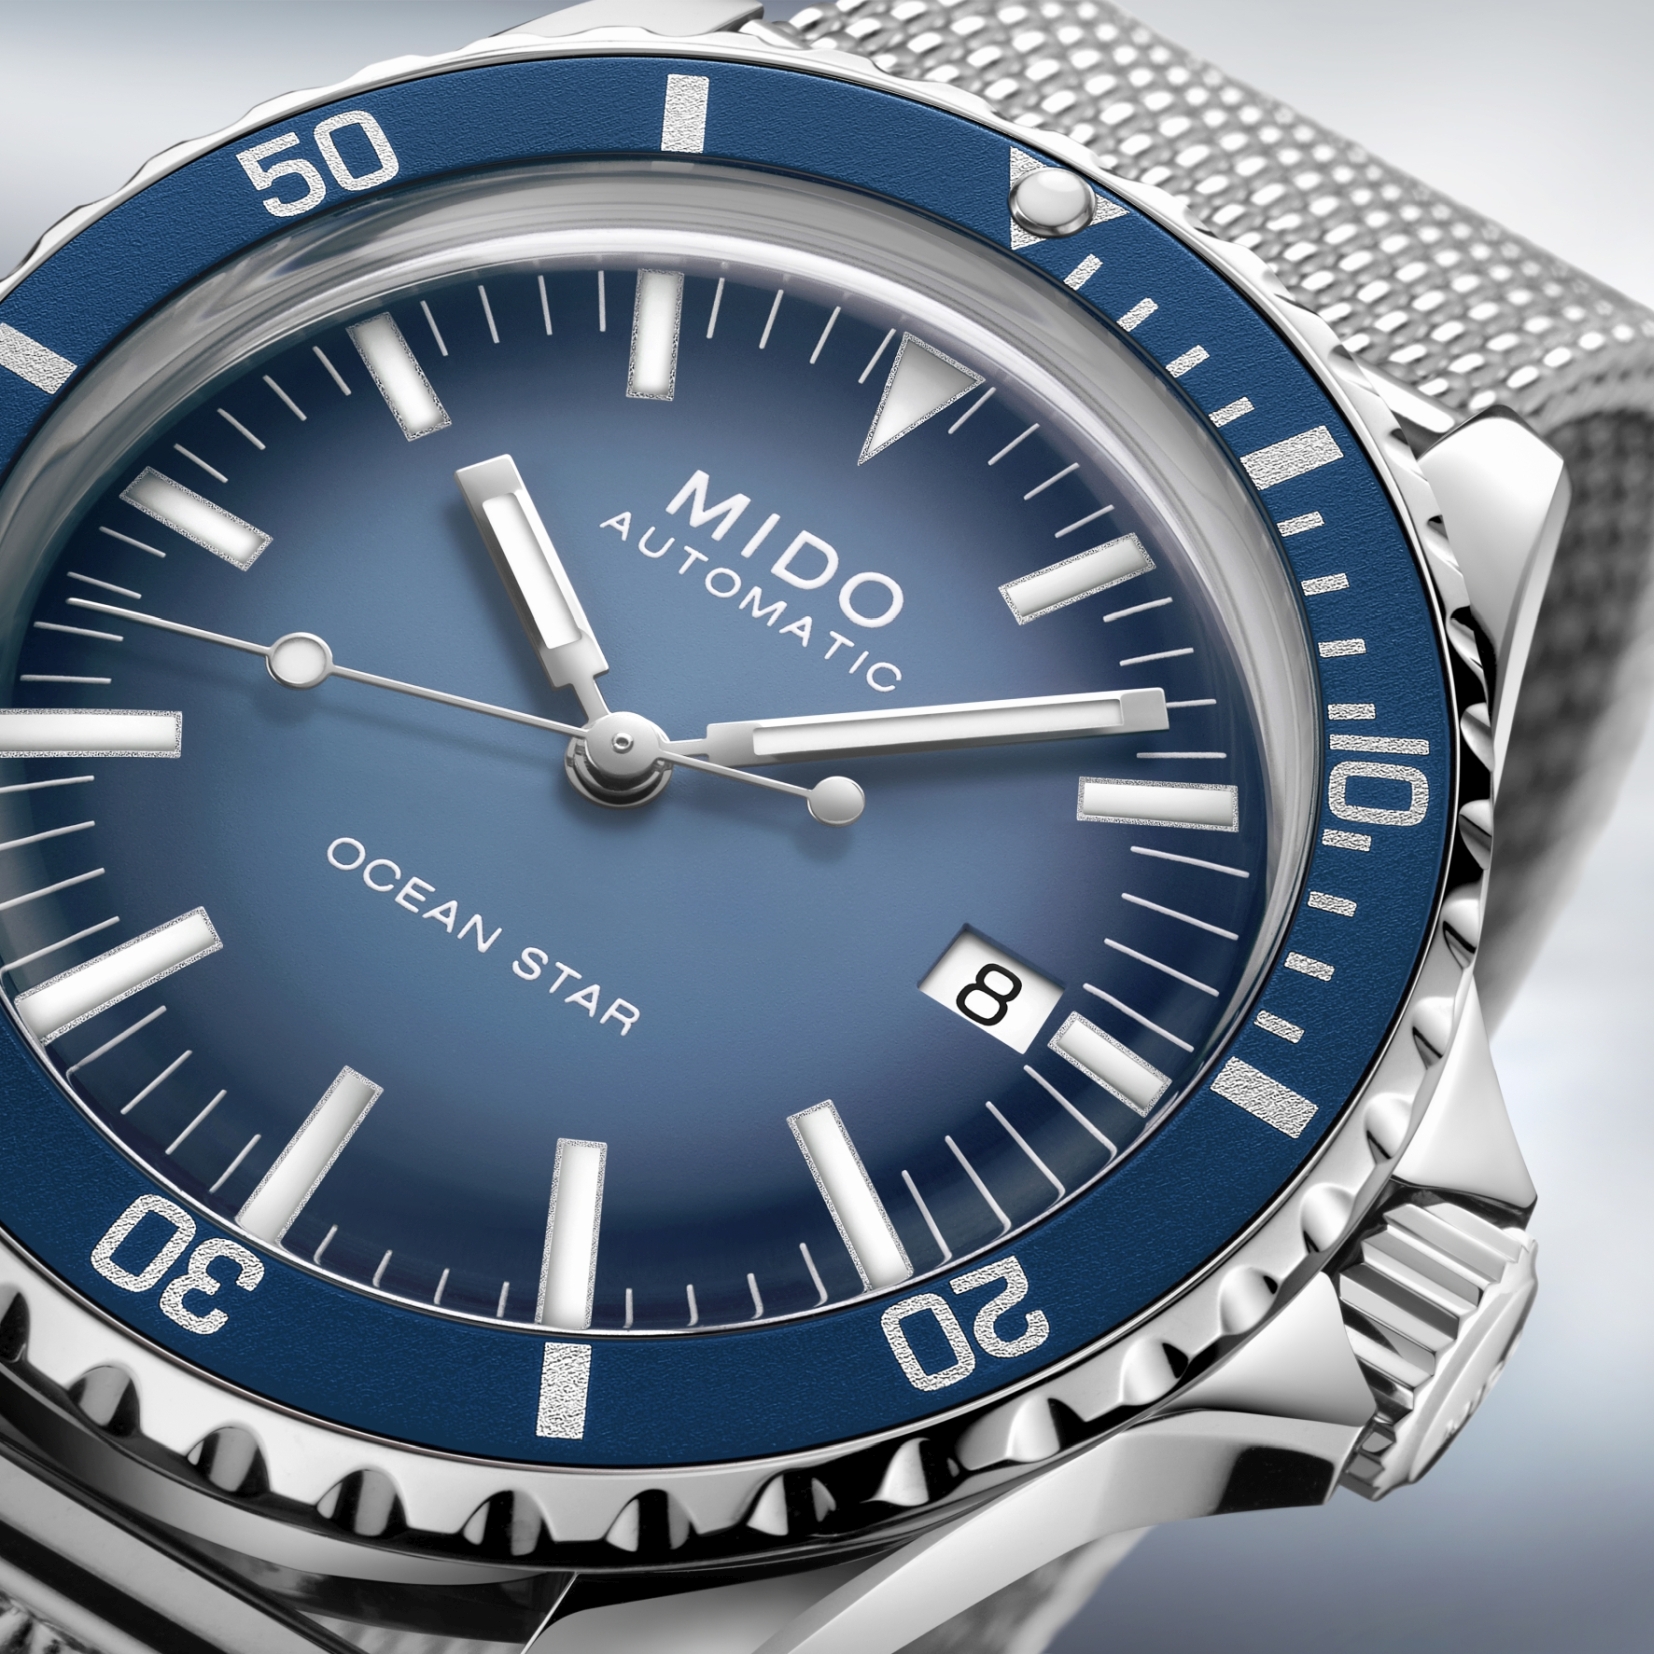 Mido Launches Ocean Star Tribute Special Edition